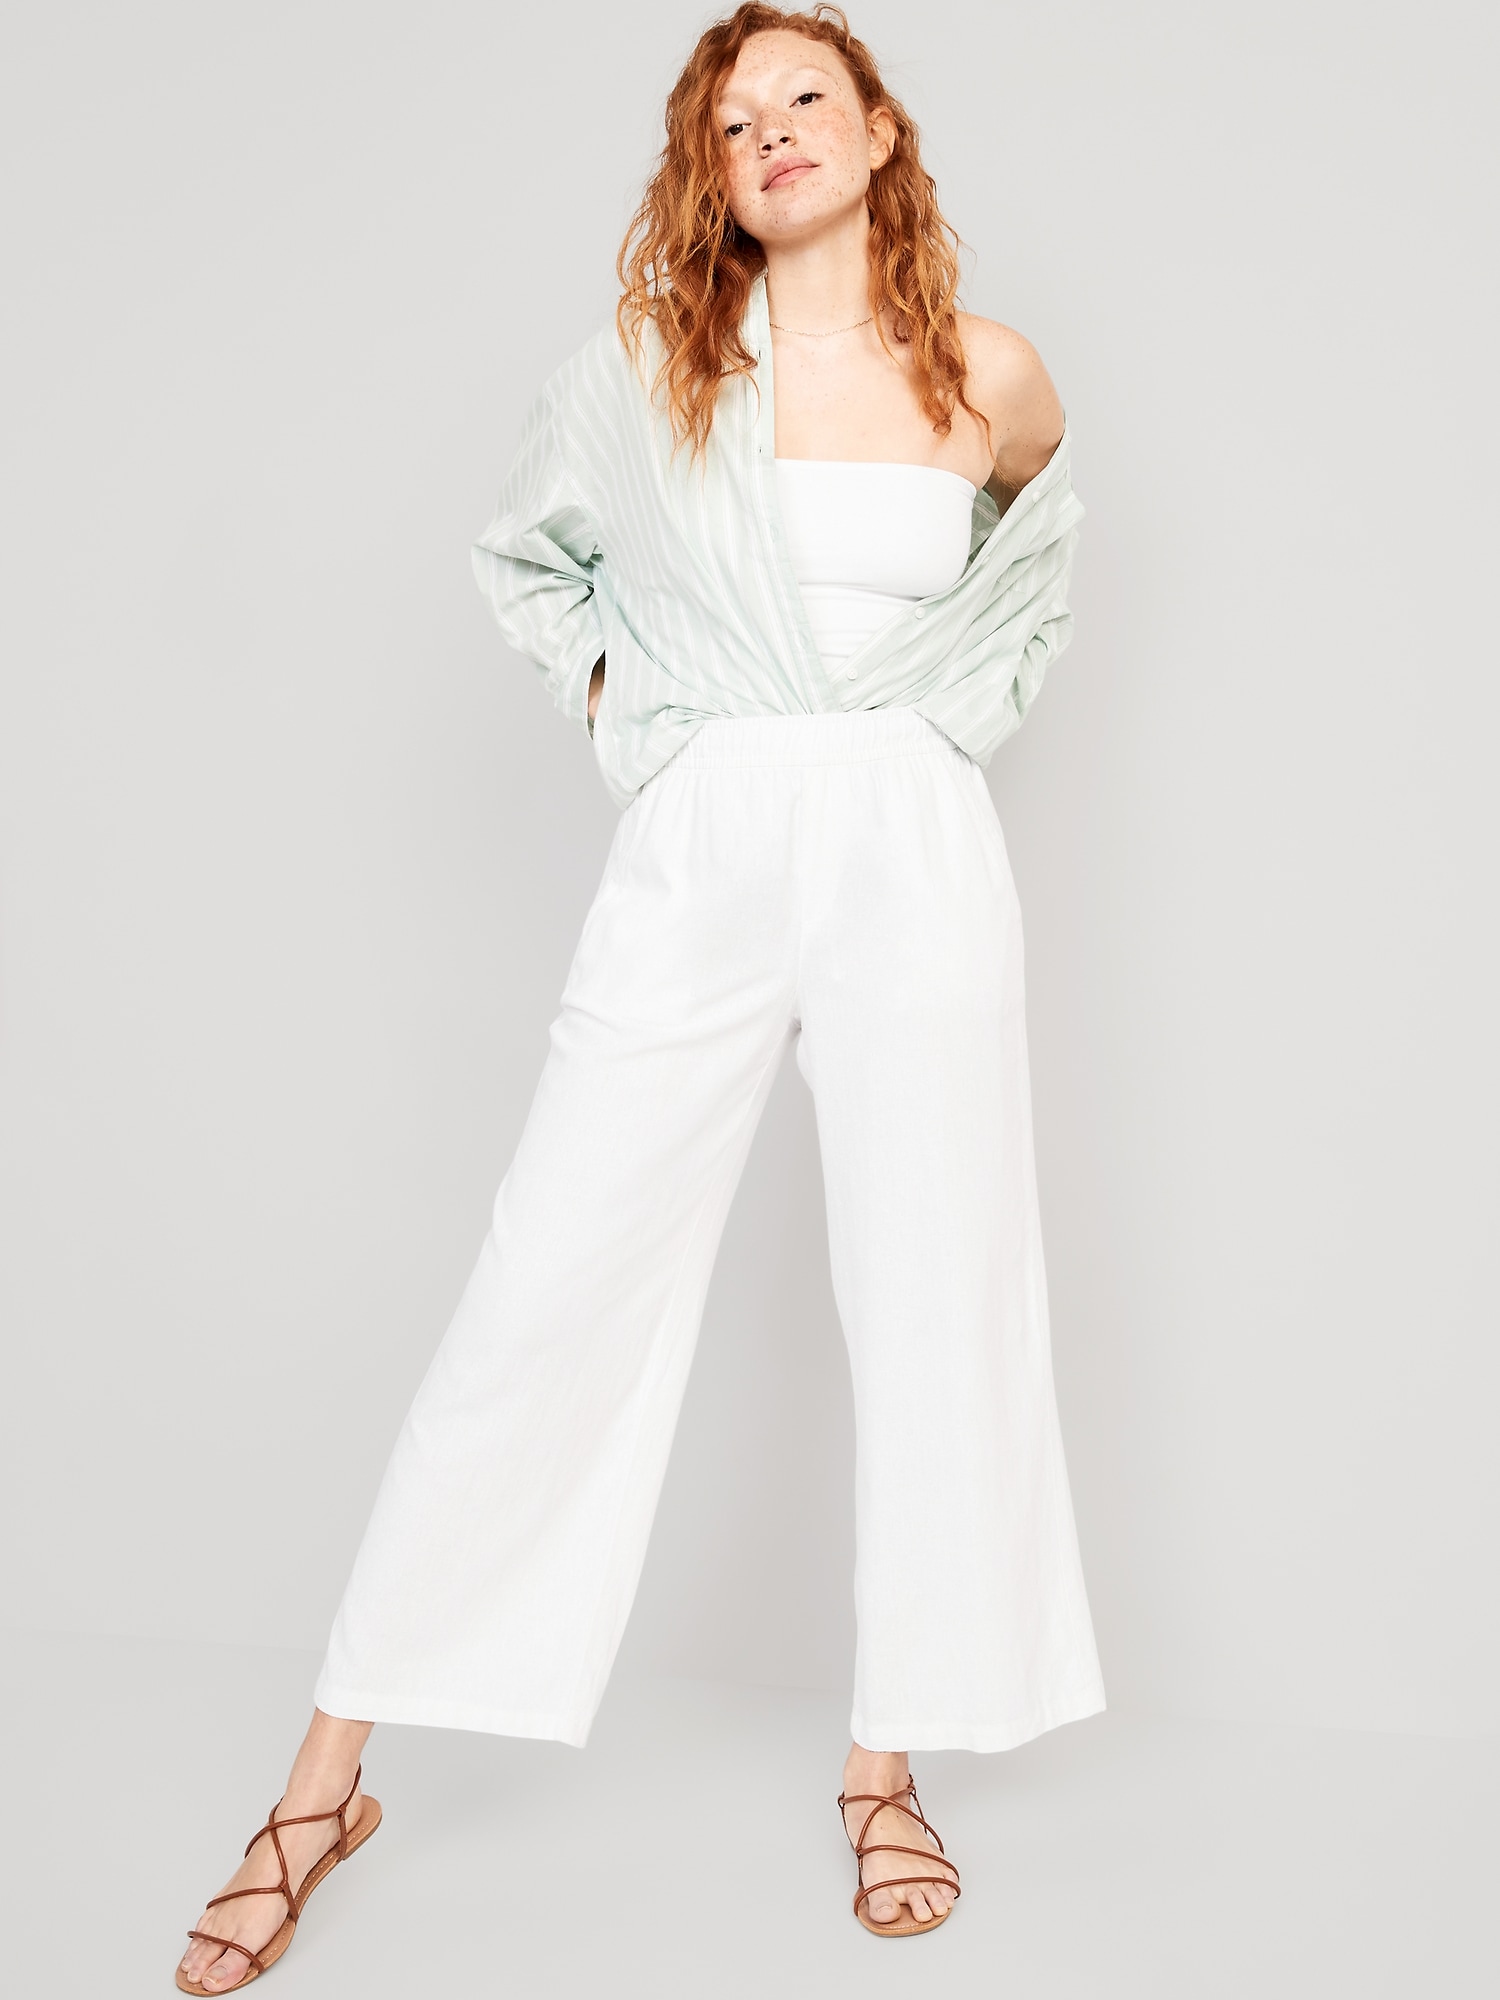 Old Navy Linen Pants for Women for sale